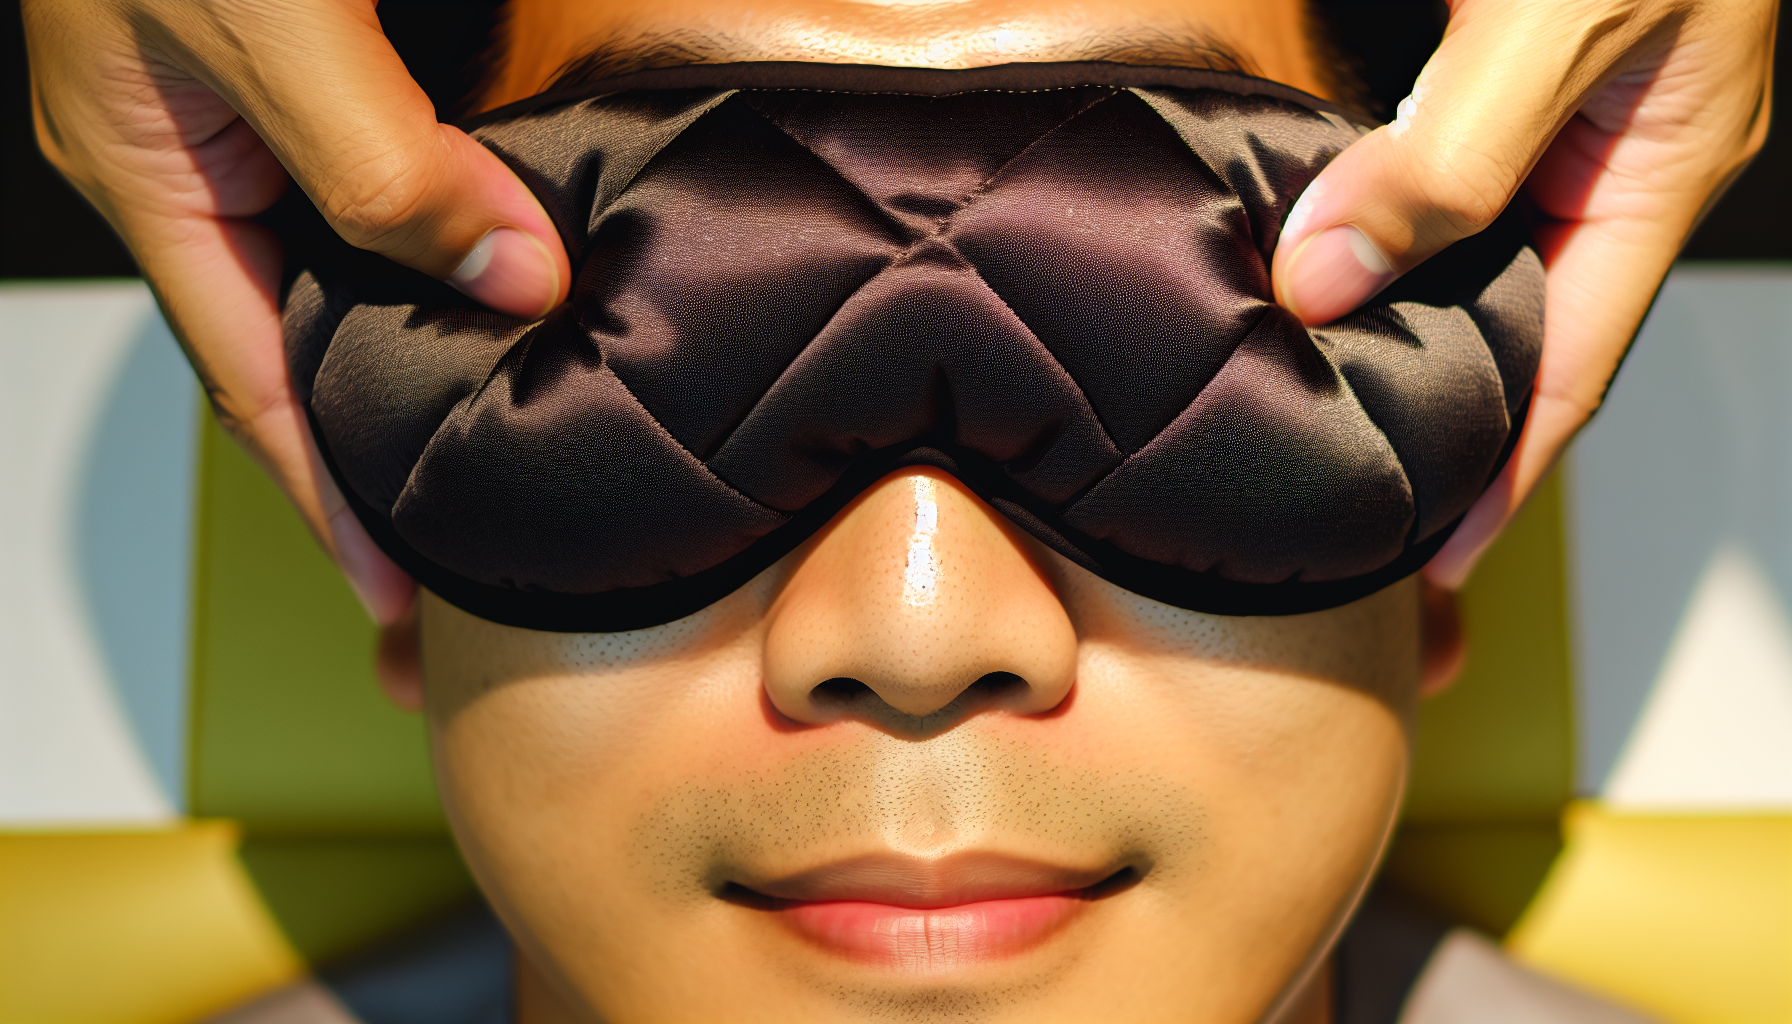 Close-up of a person using a weighted eye pillow